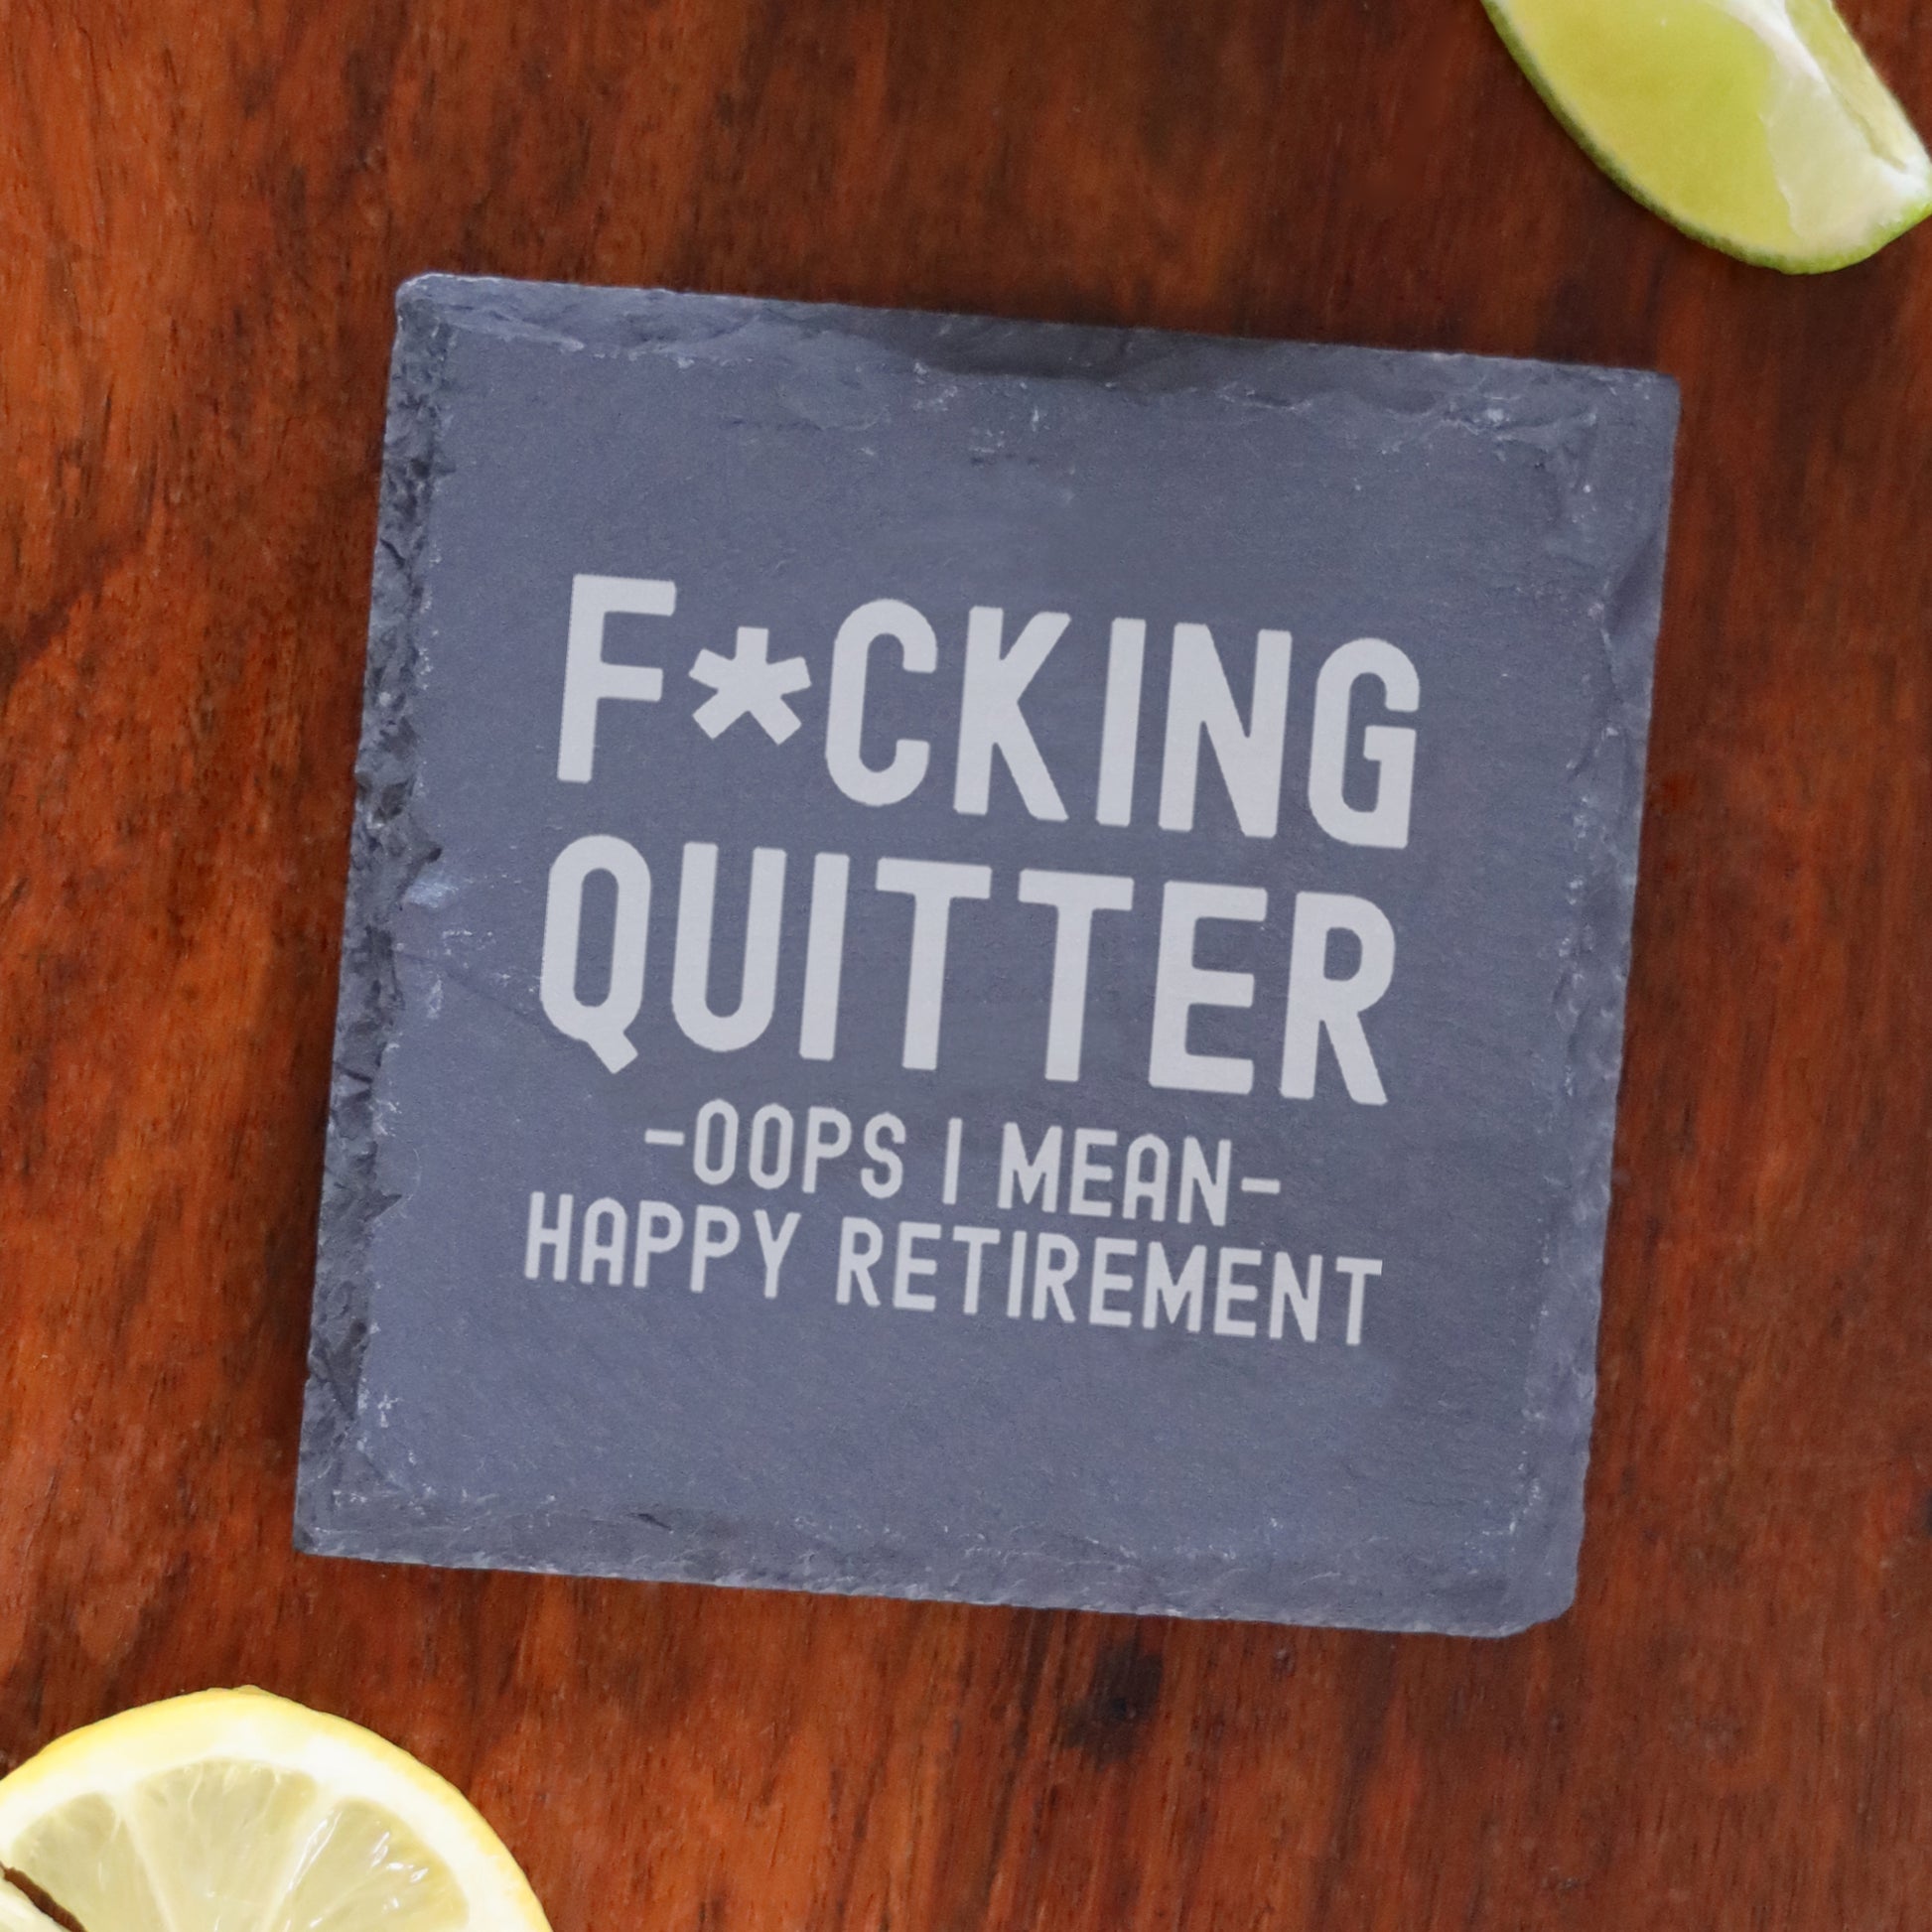 Engraved Funny "F*cking Quitter, Oops I mean Happy Retirement" Whisky Glass and/or Coaster Novelty Gift  - Always Looking Good - Square Coaster Only  